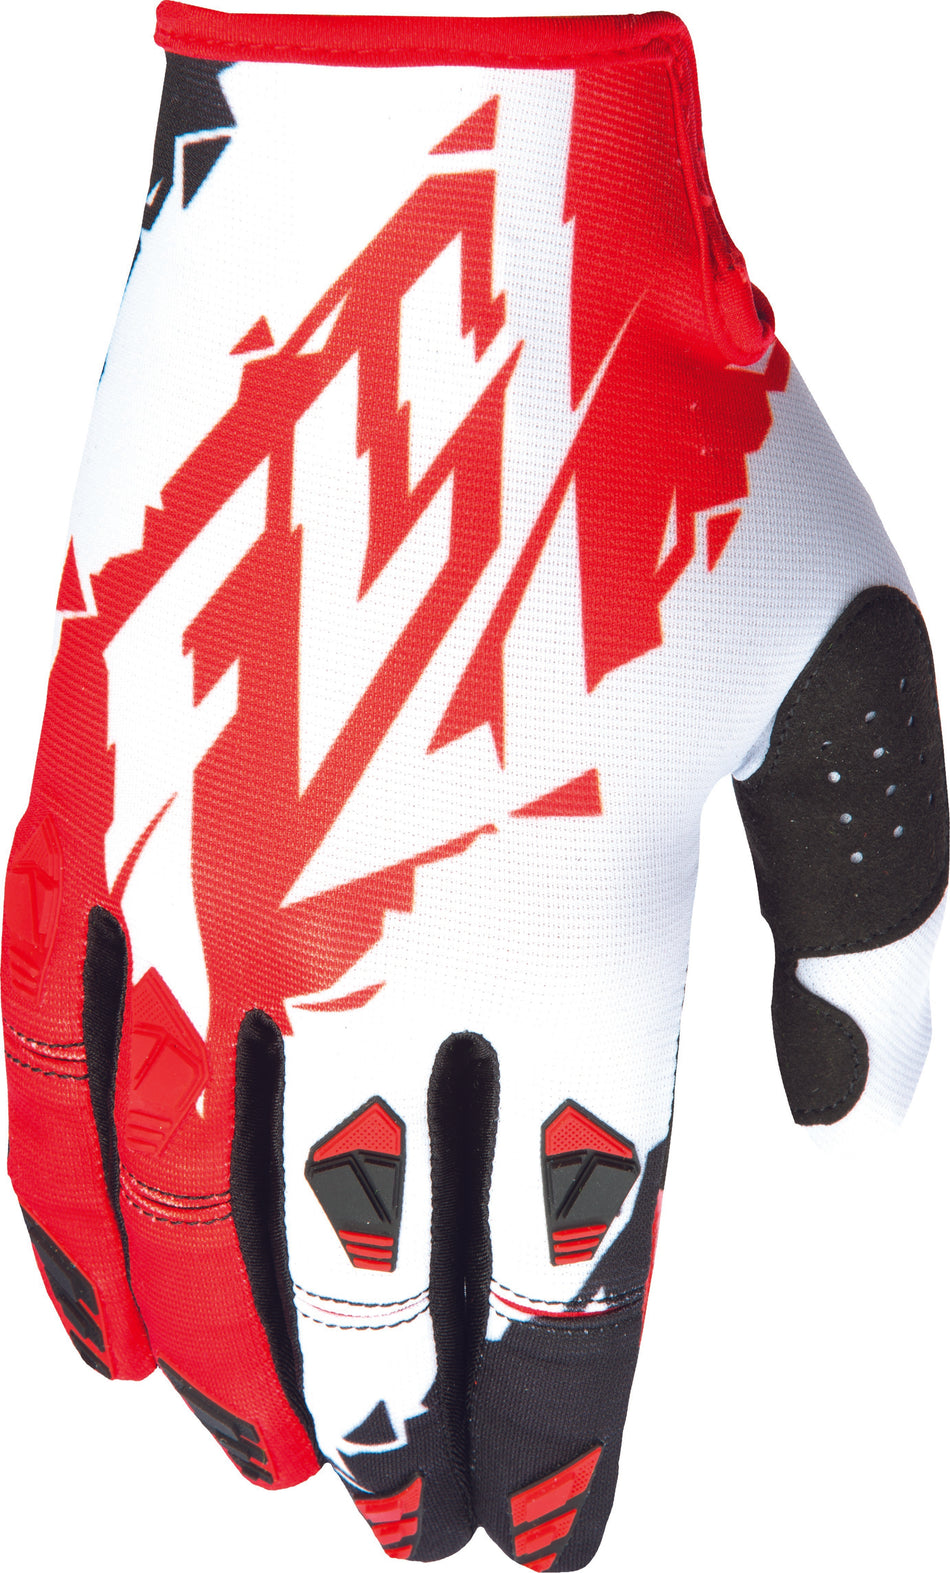 FLY RACING Kinetic Glove Red/White Sz 5 Ym 370-41405